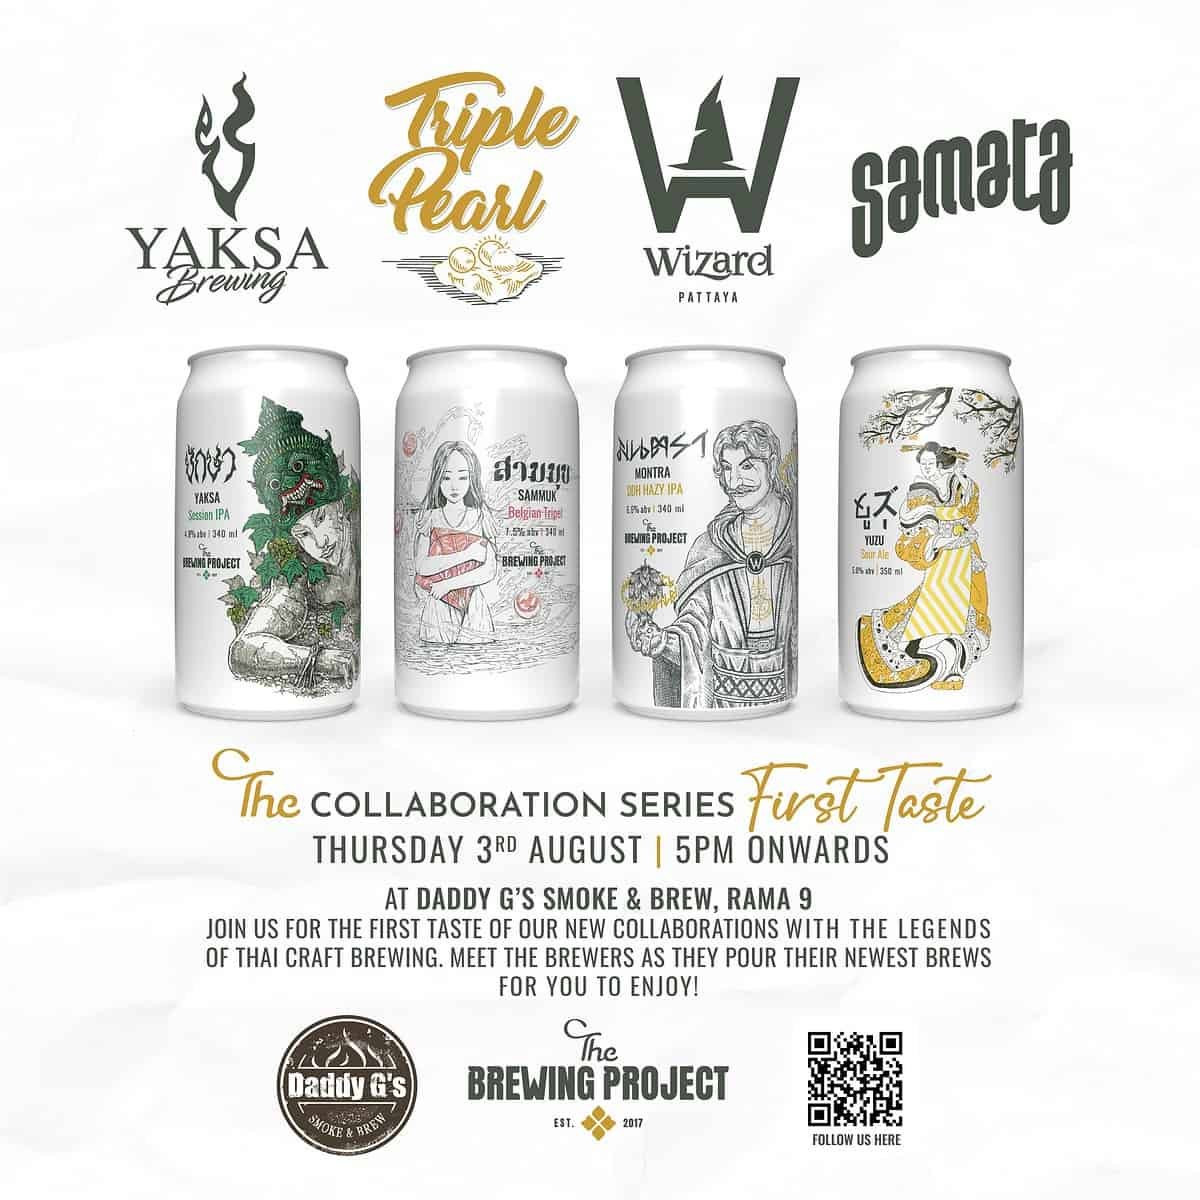 The Brewing Project Thailand collaboration event